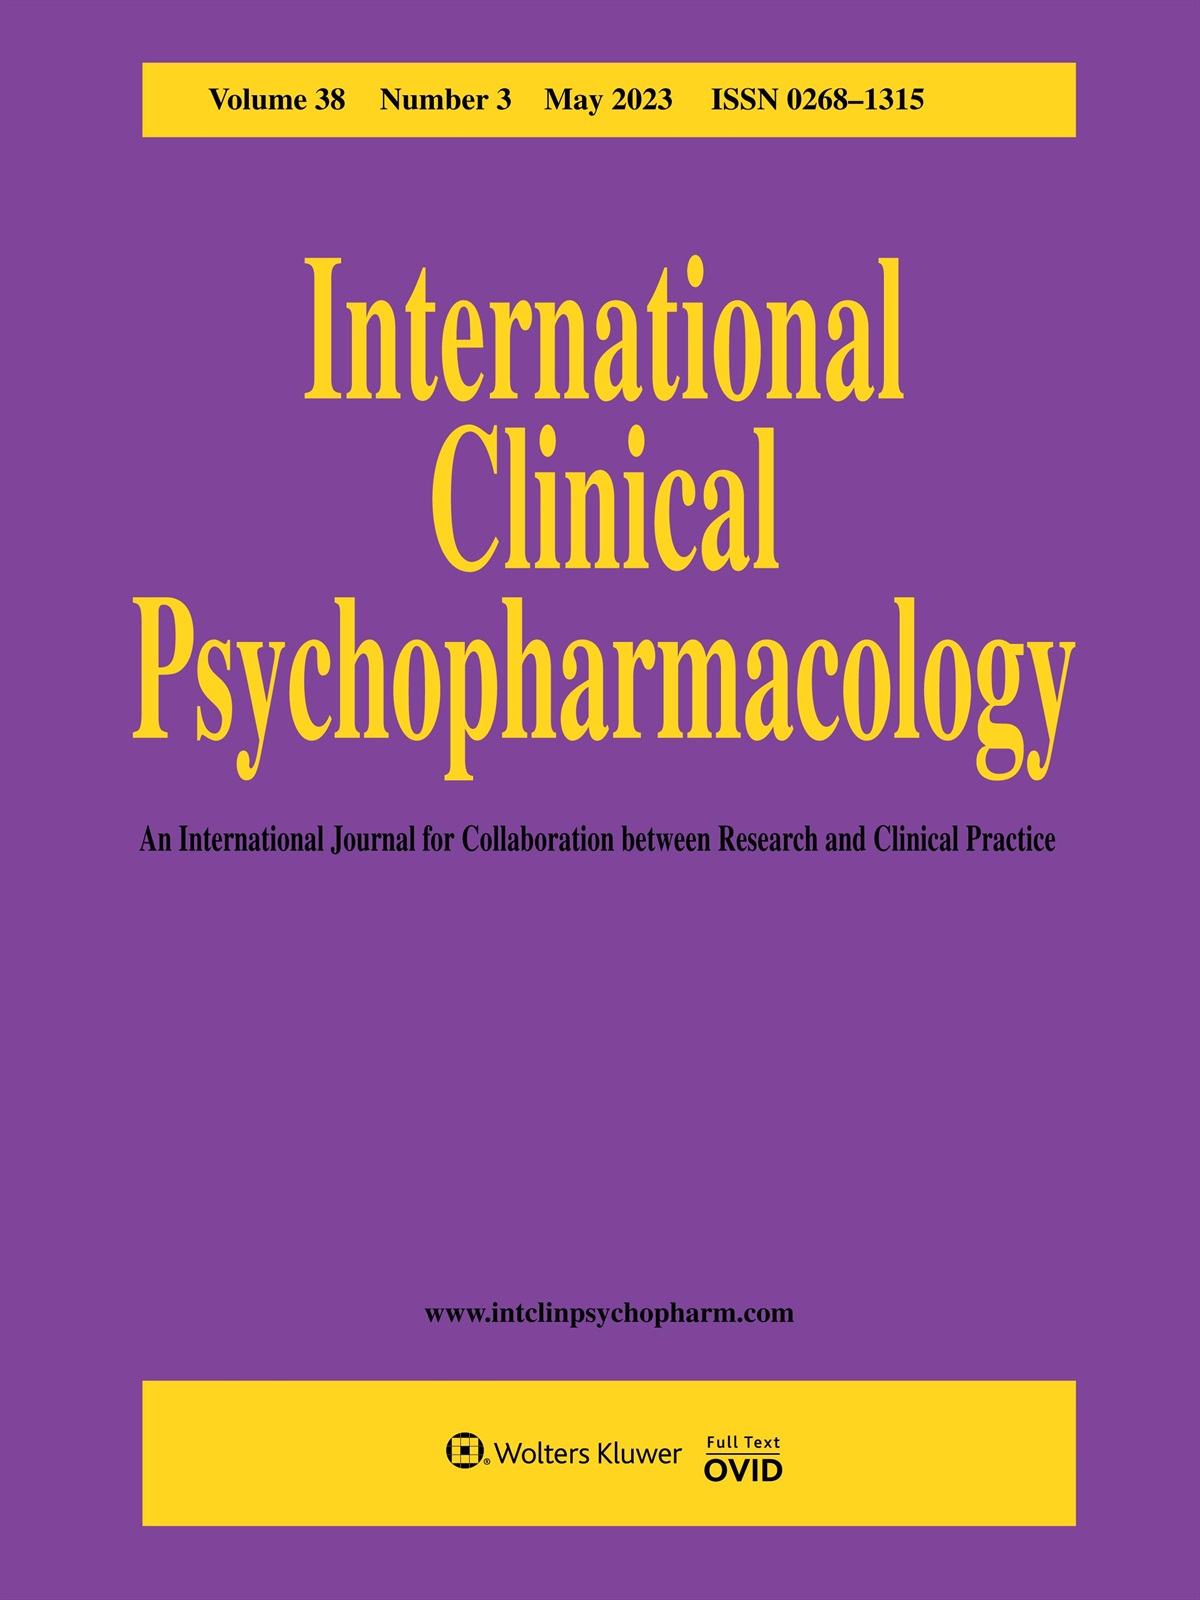 The importance of early and proactive use of long-acting injectable antipsychotics in the management of schizophrenia